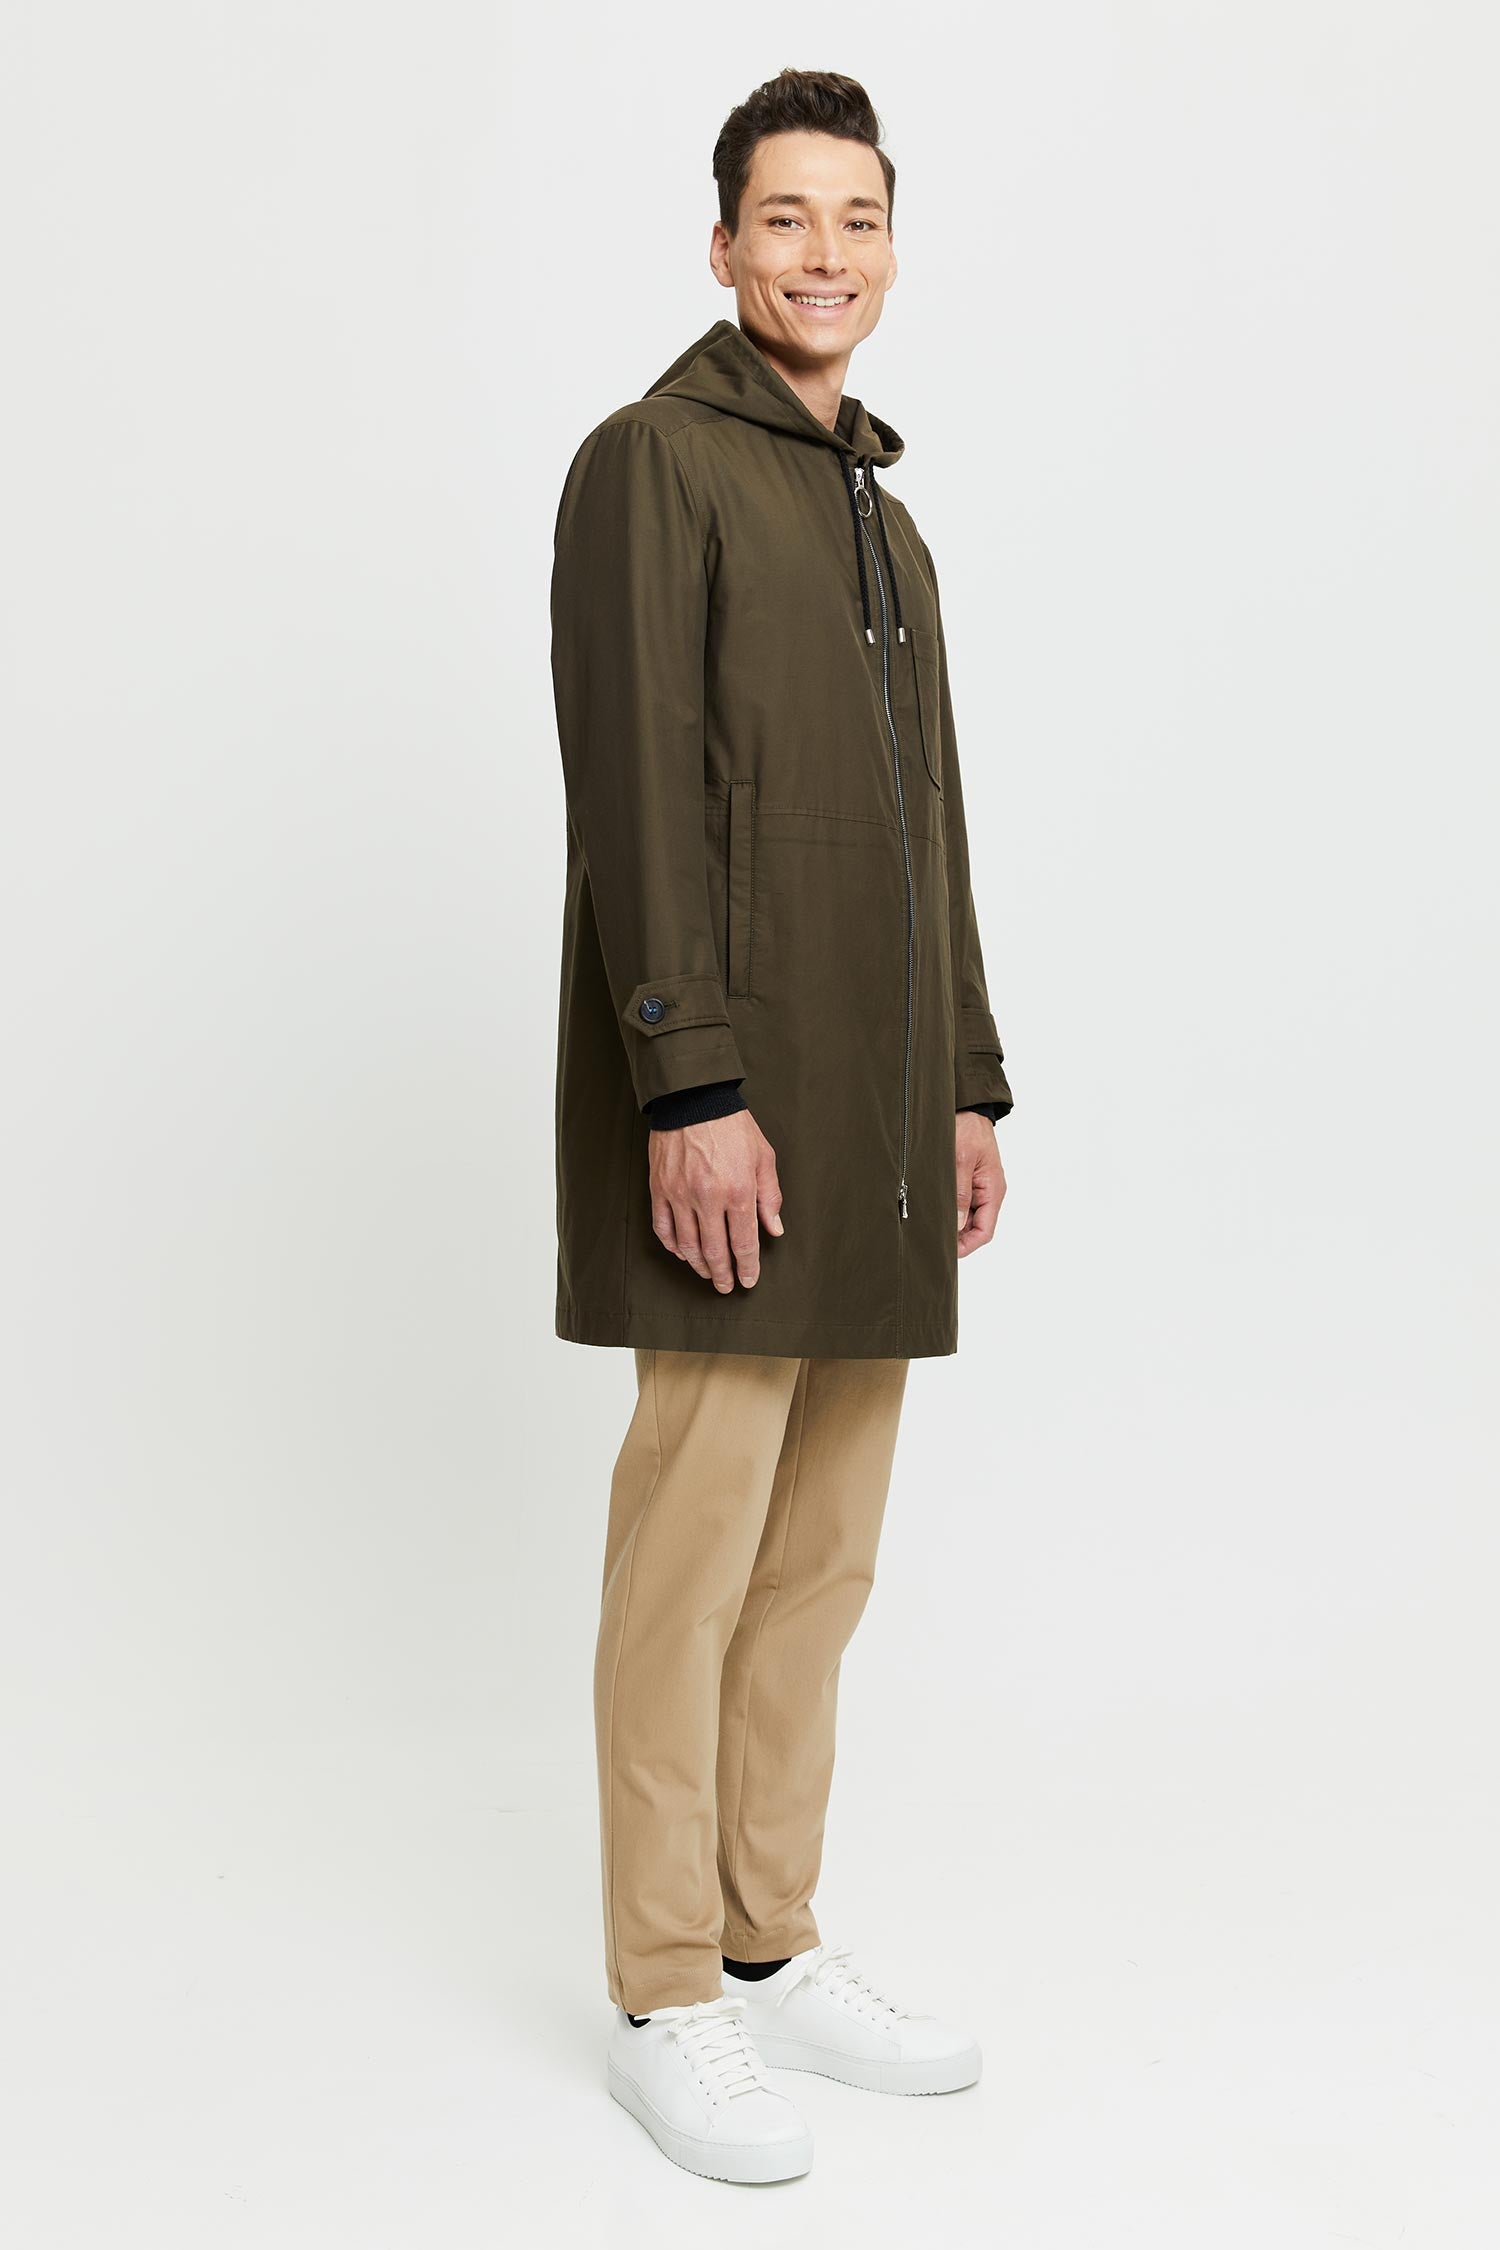 Frenn Paavo sustainable premium quality organic cotton and recycled polyester wind and water repellent parka coat green